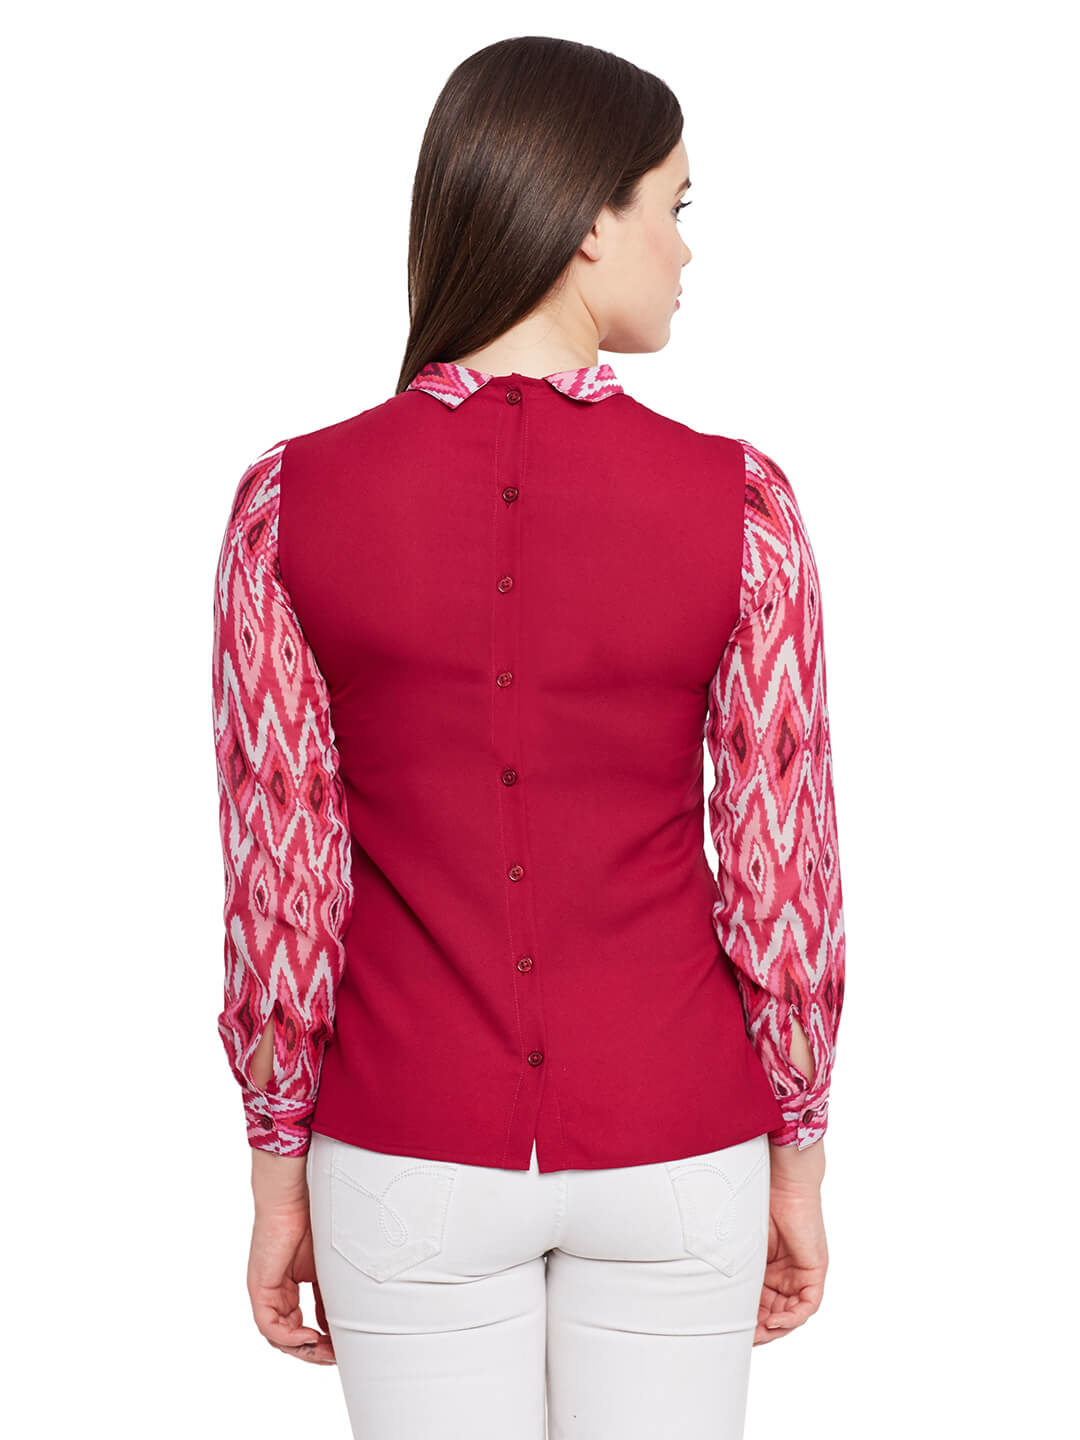 Back Button Down Shirt In Marsala Print With Pleats At Front